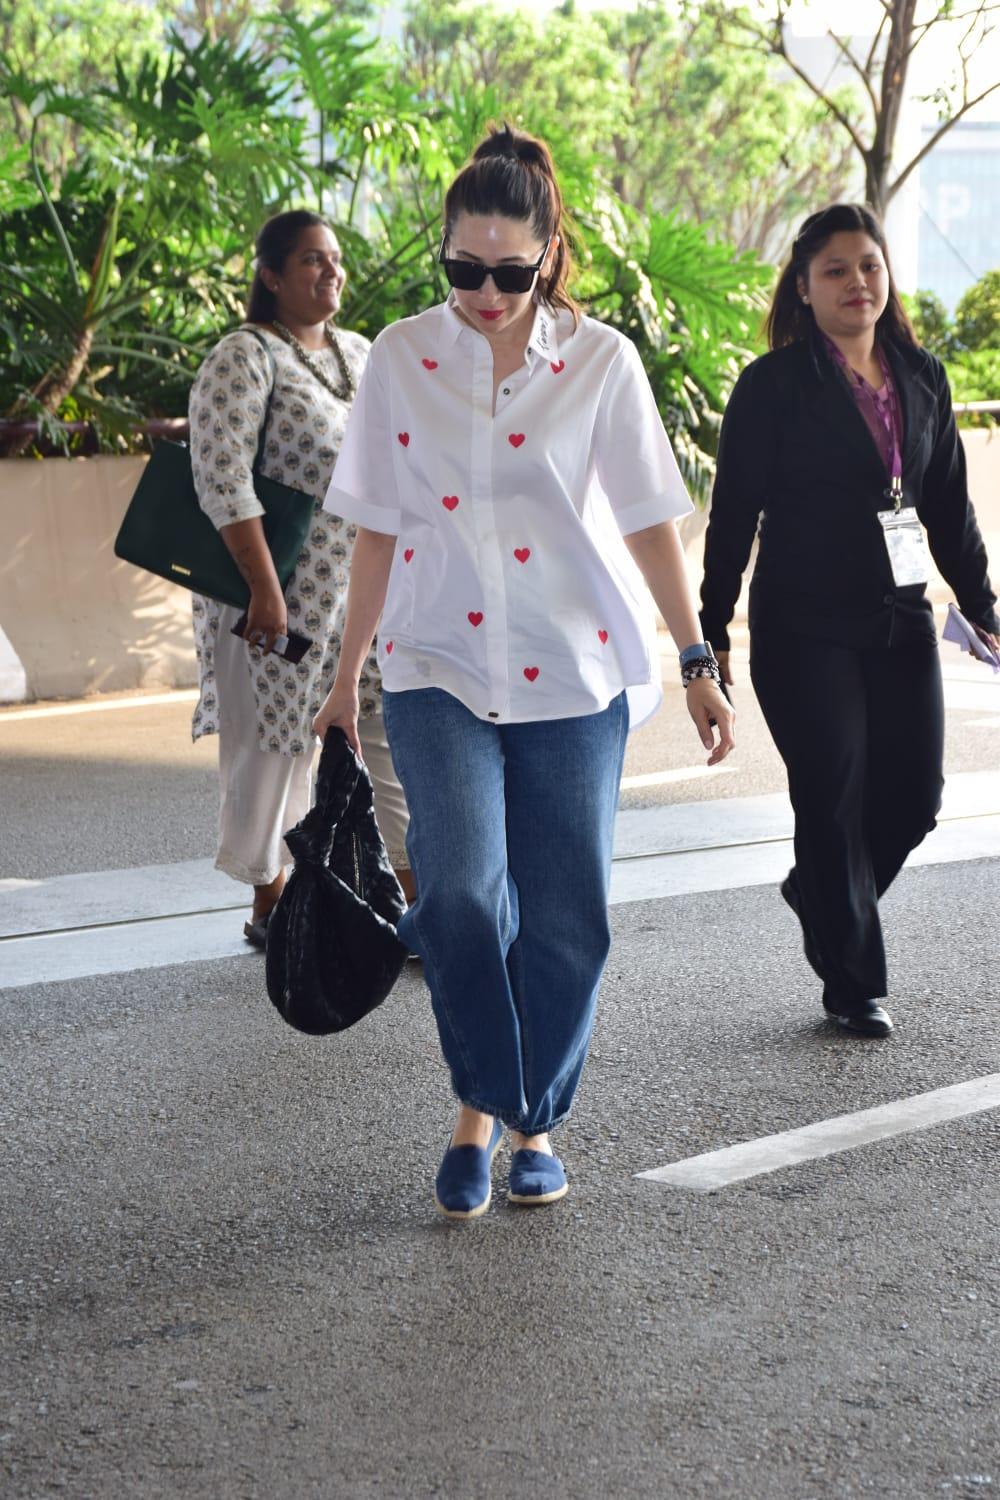 Karisma Kapoor was clicked at the Mumbai airport today. The actress was absolutely glowing!